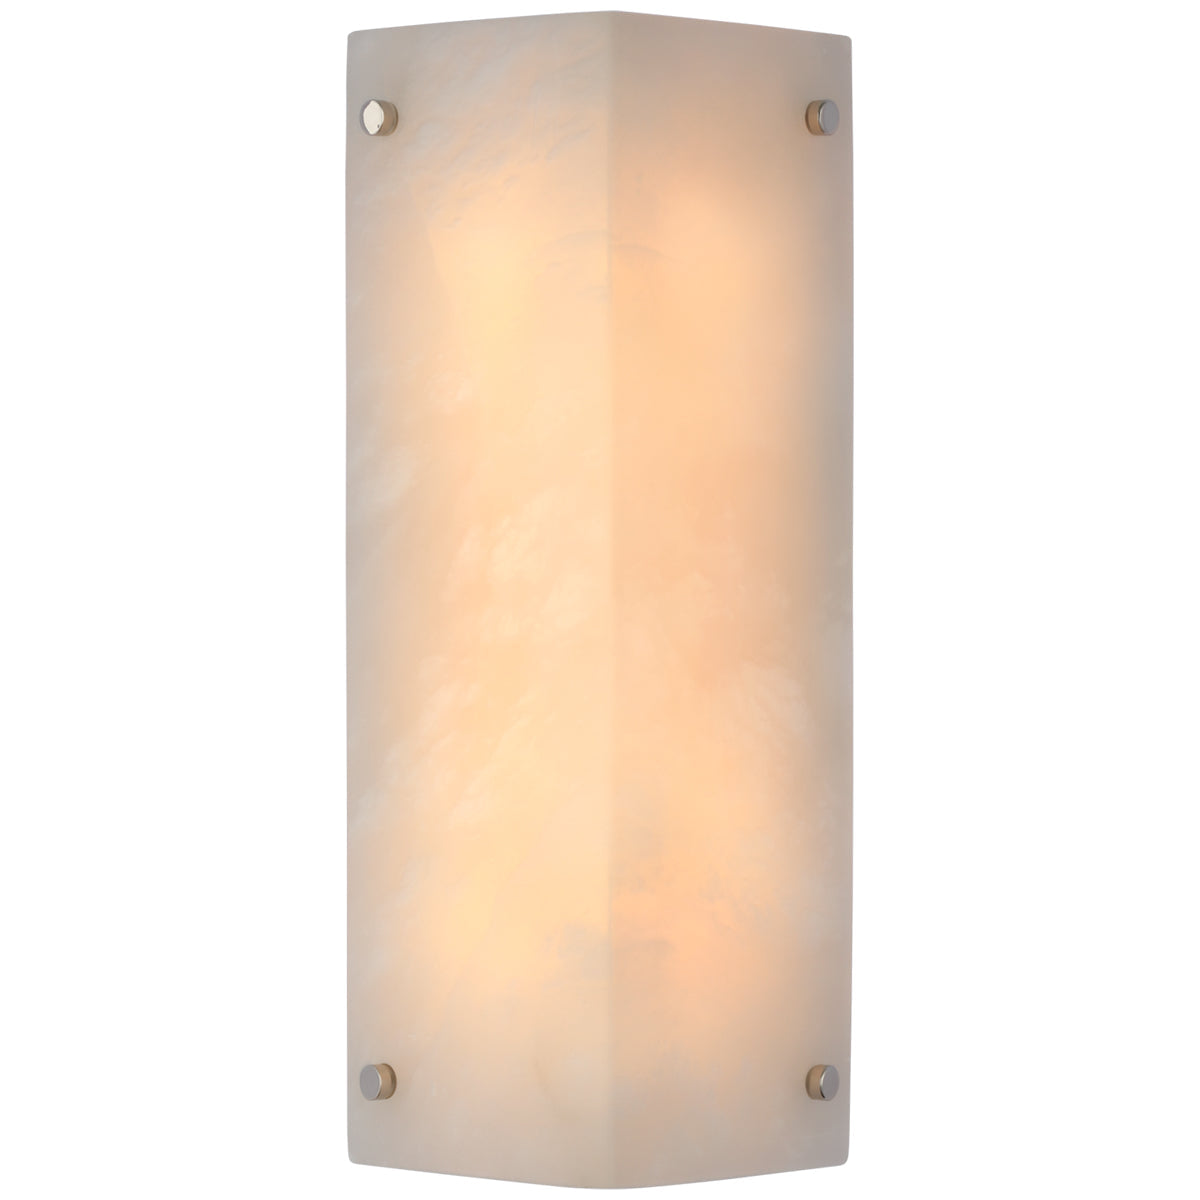 Visual Comfort Clayton Wall Sconce in Alabster